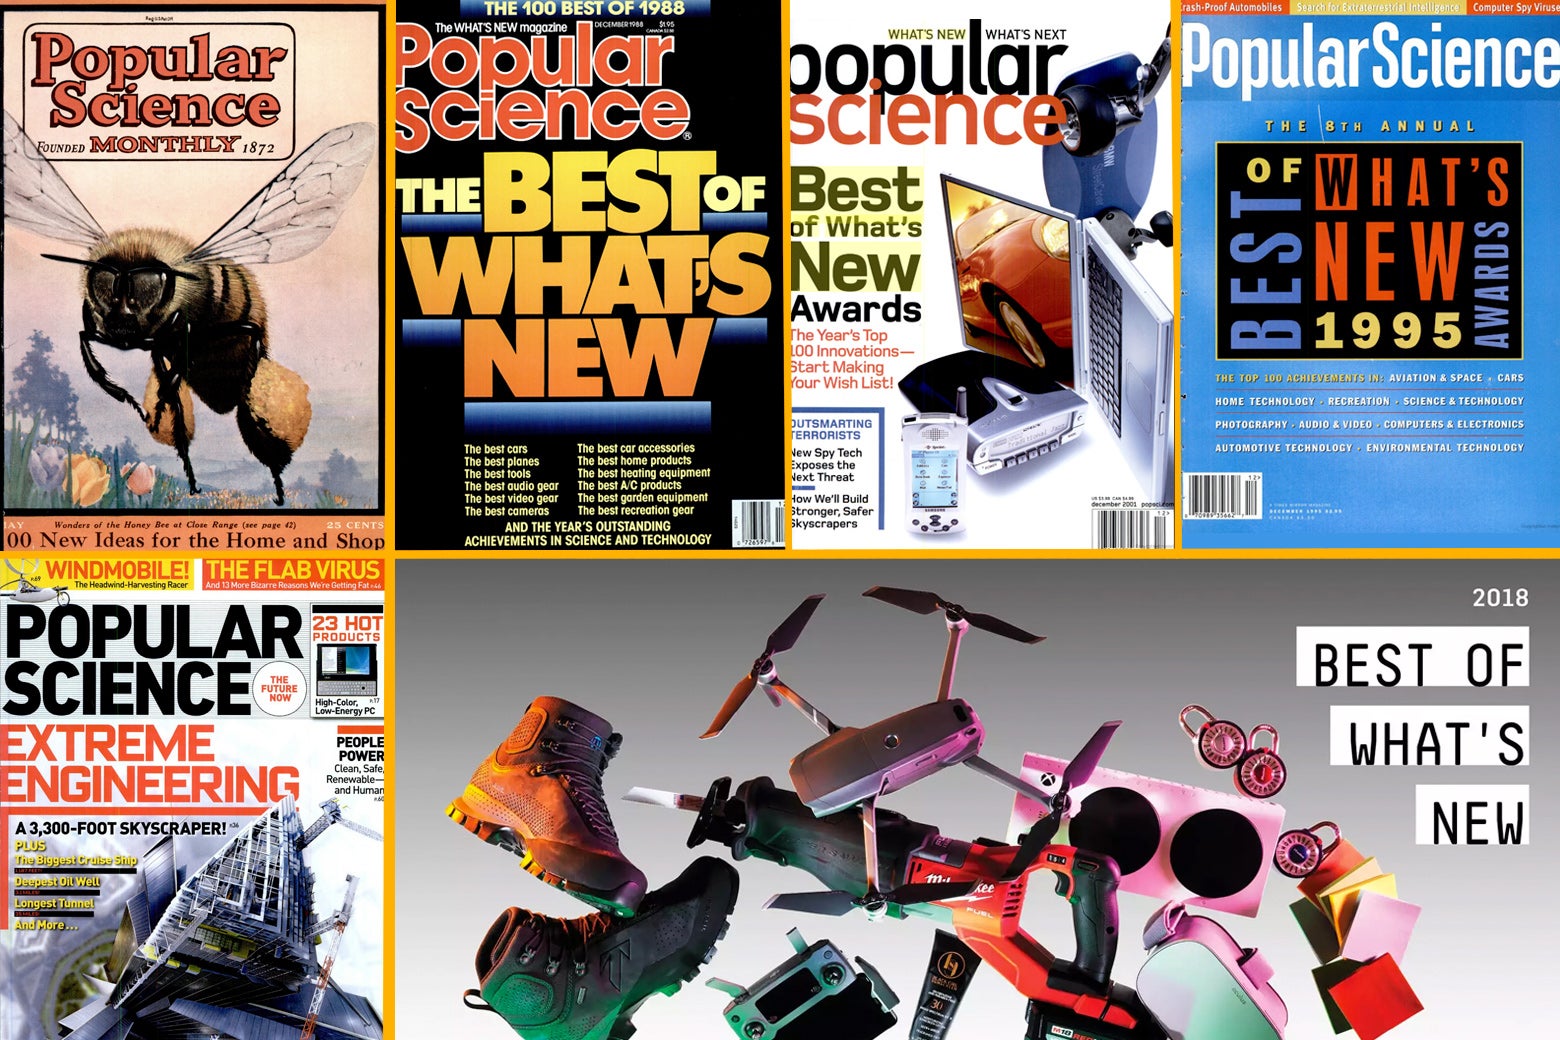 A collage of Popular Science "Best of What's New" covers.